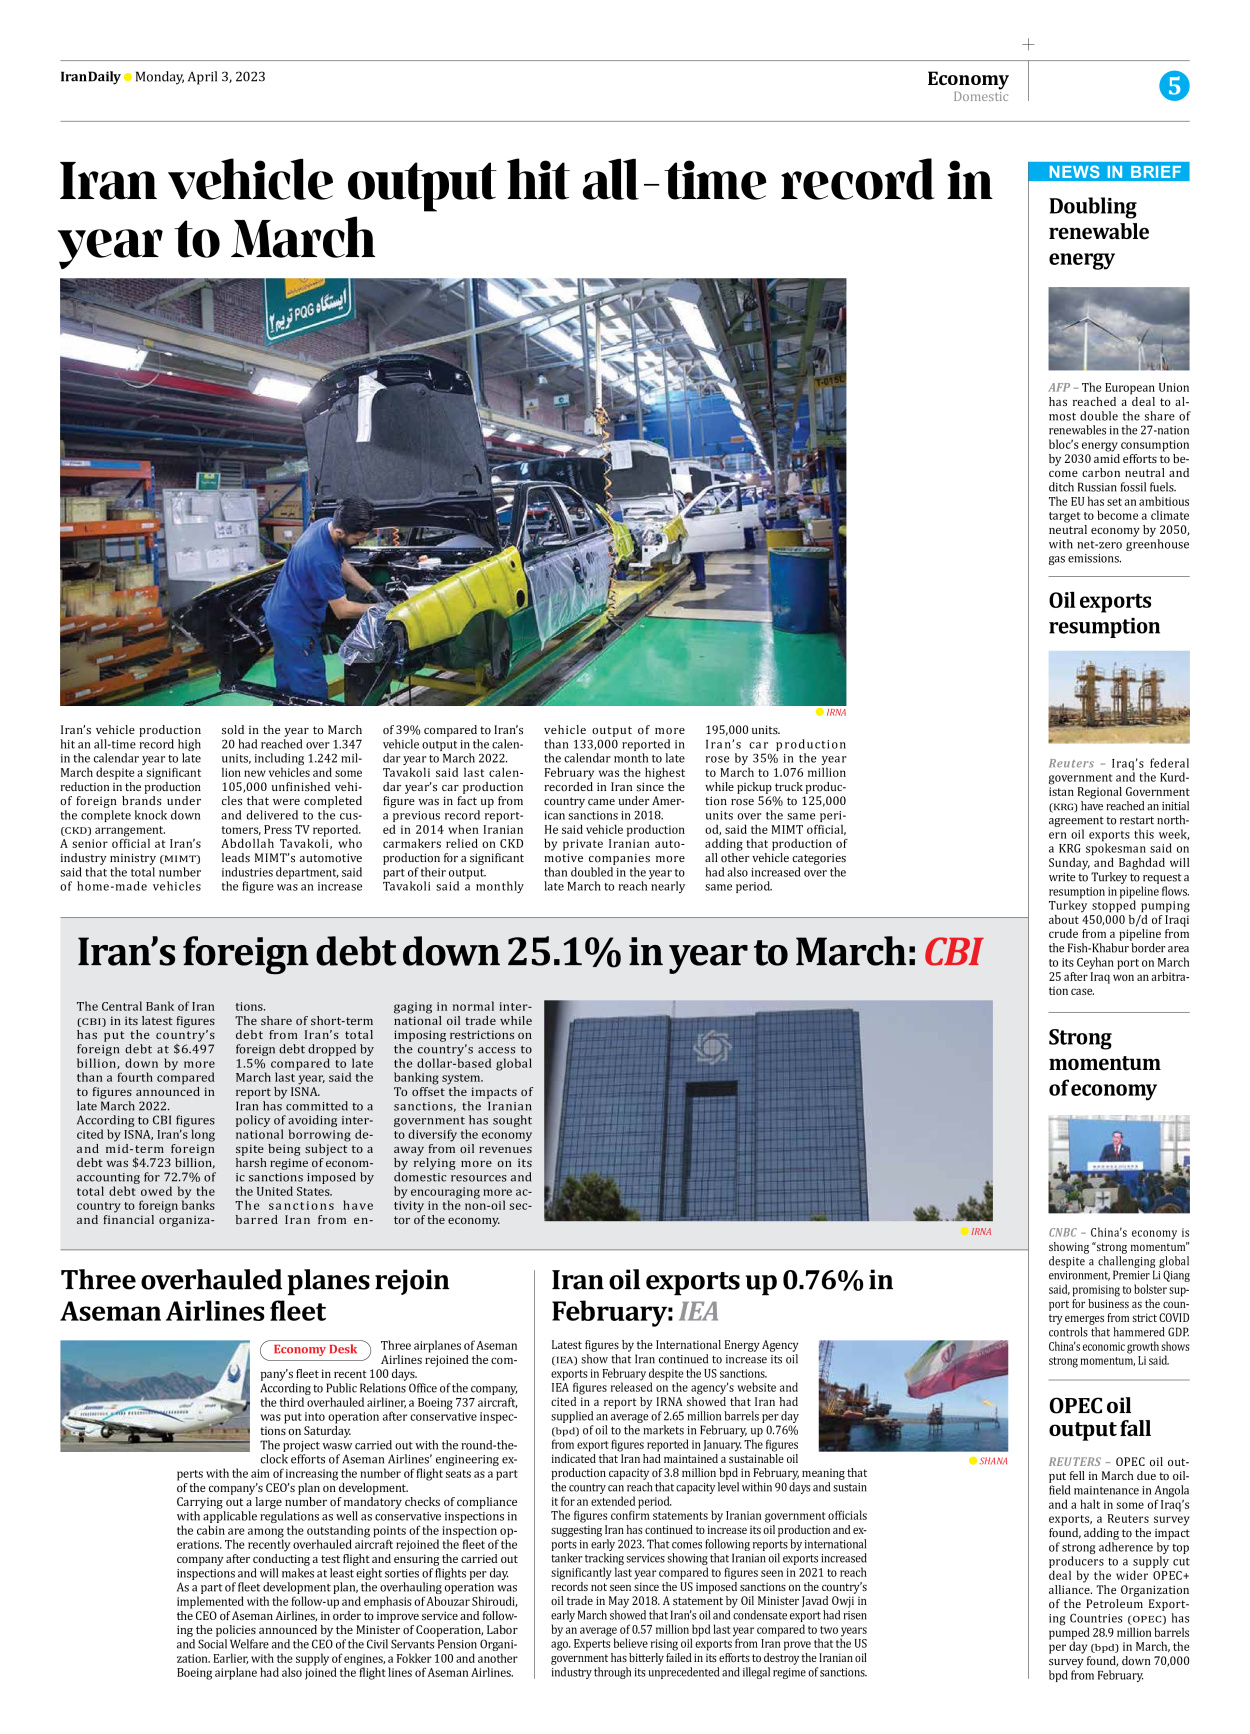 Iran Daily - Number Seven Thousand Two Hundred and Sixty - 03 April 2023 - Page 5